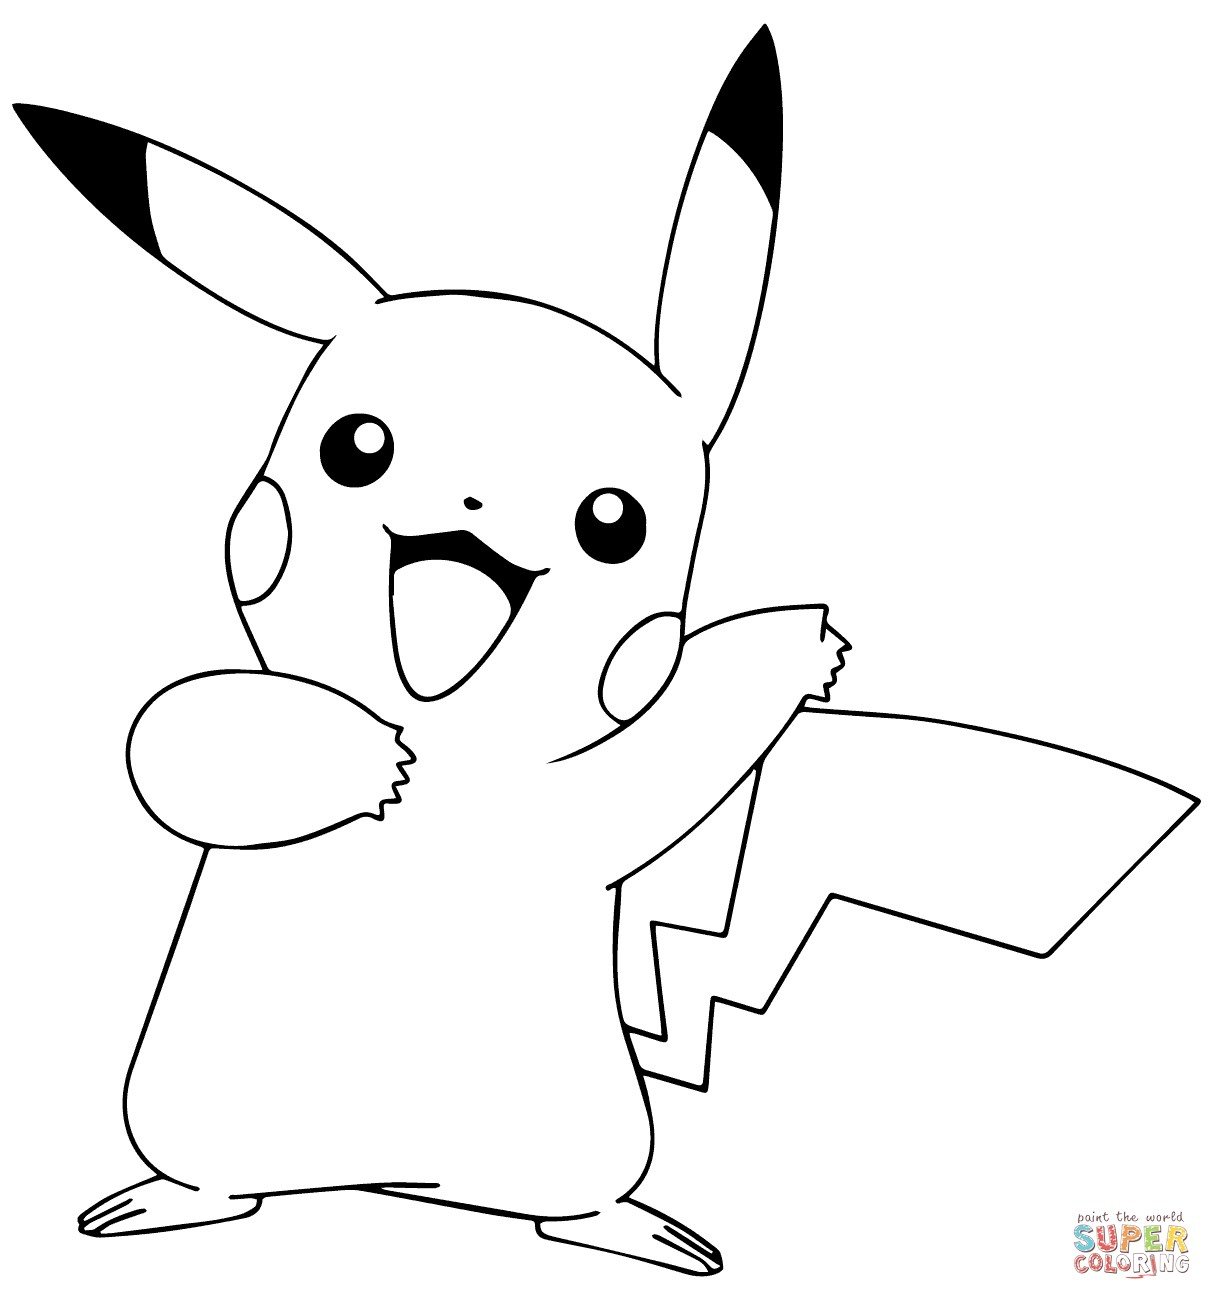 Pikachu Libre Coloring Page Coloring Pages Pikachu Wiim Coloring Page